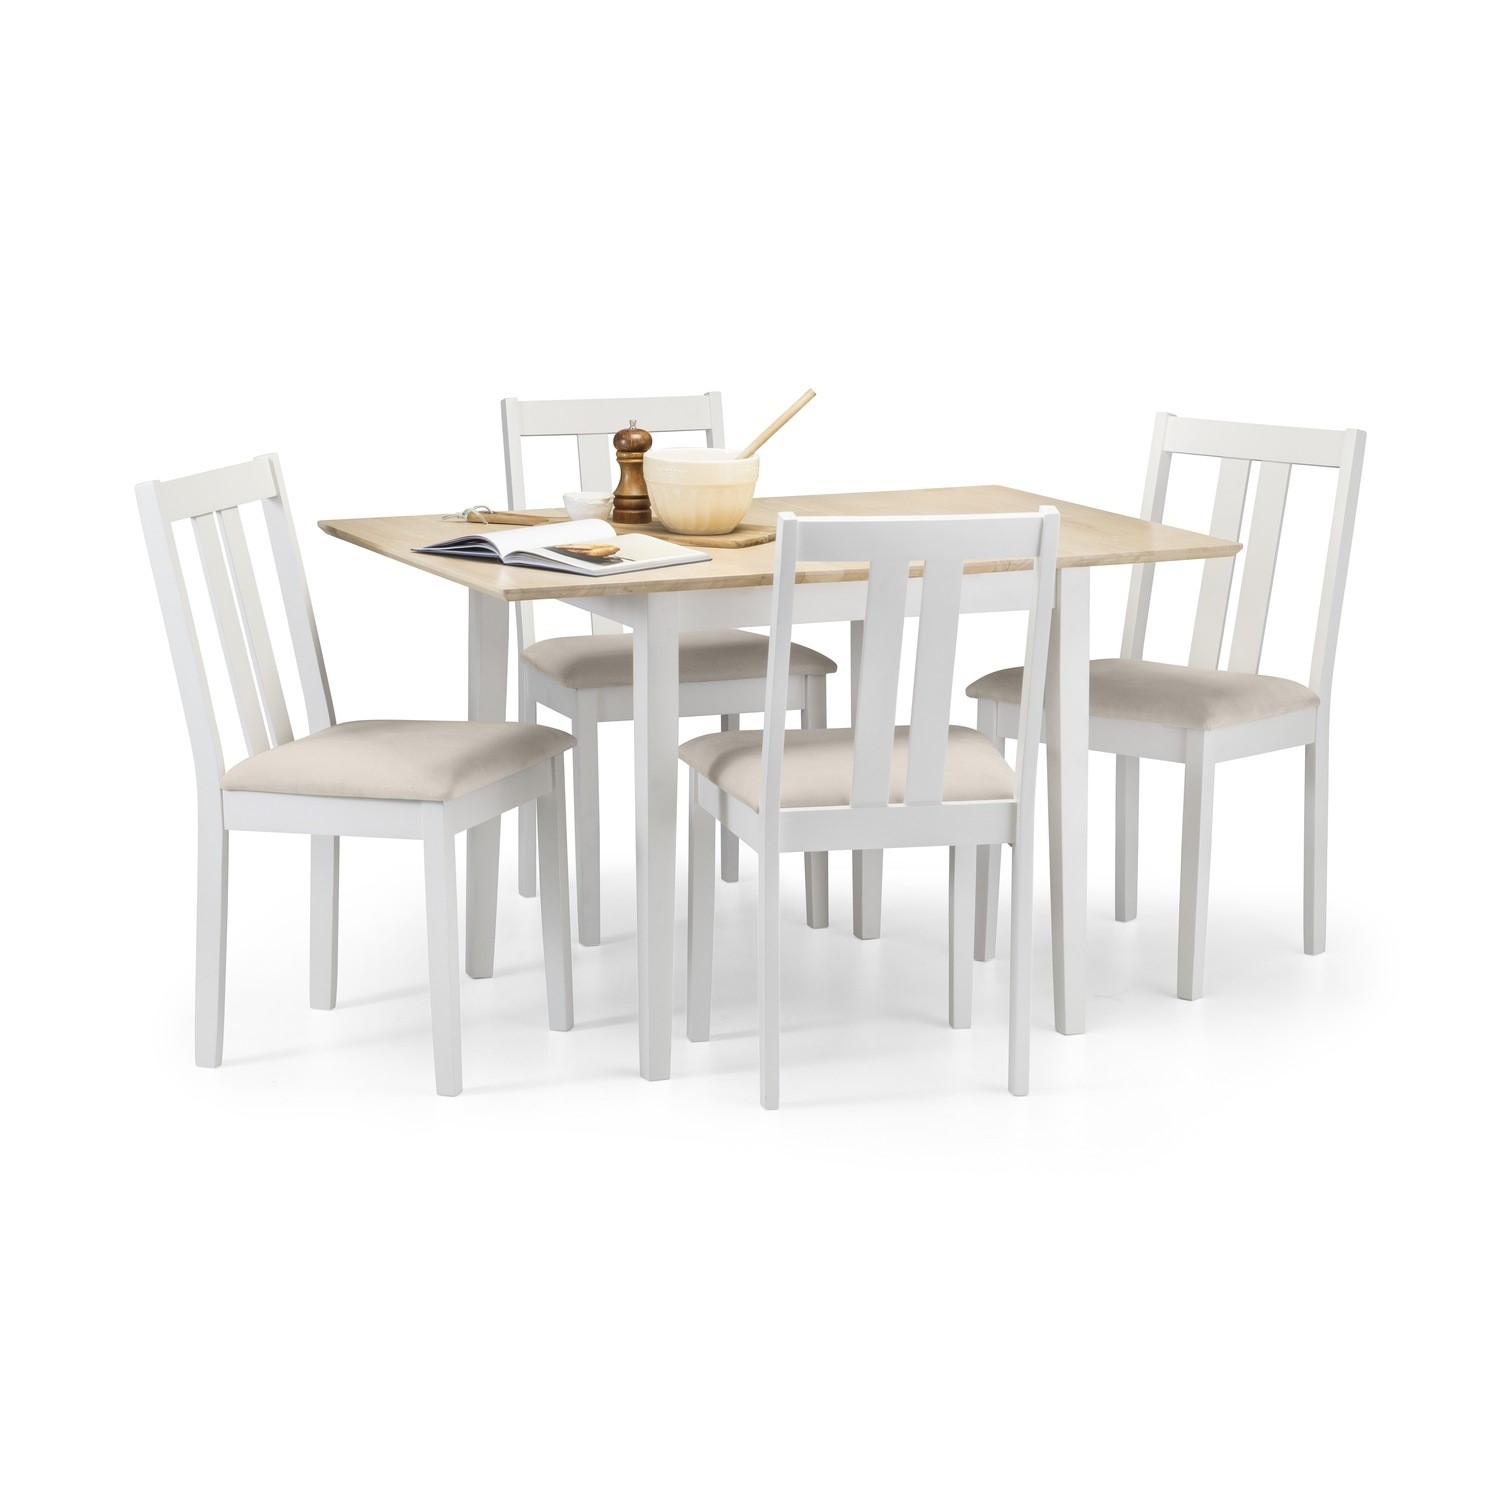 Read more about Two tone dining table and 4 matching dining chairs julian bowen